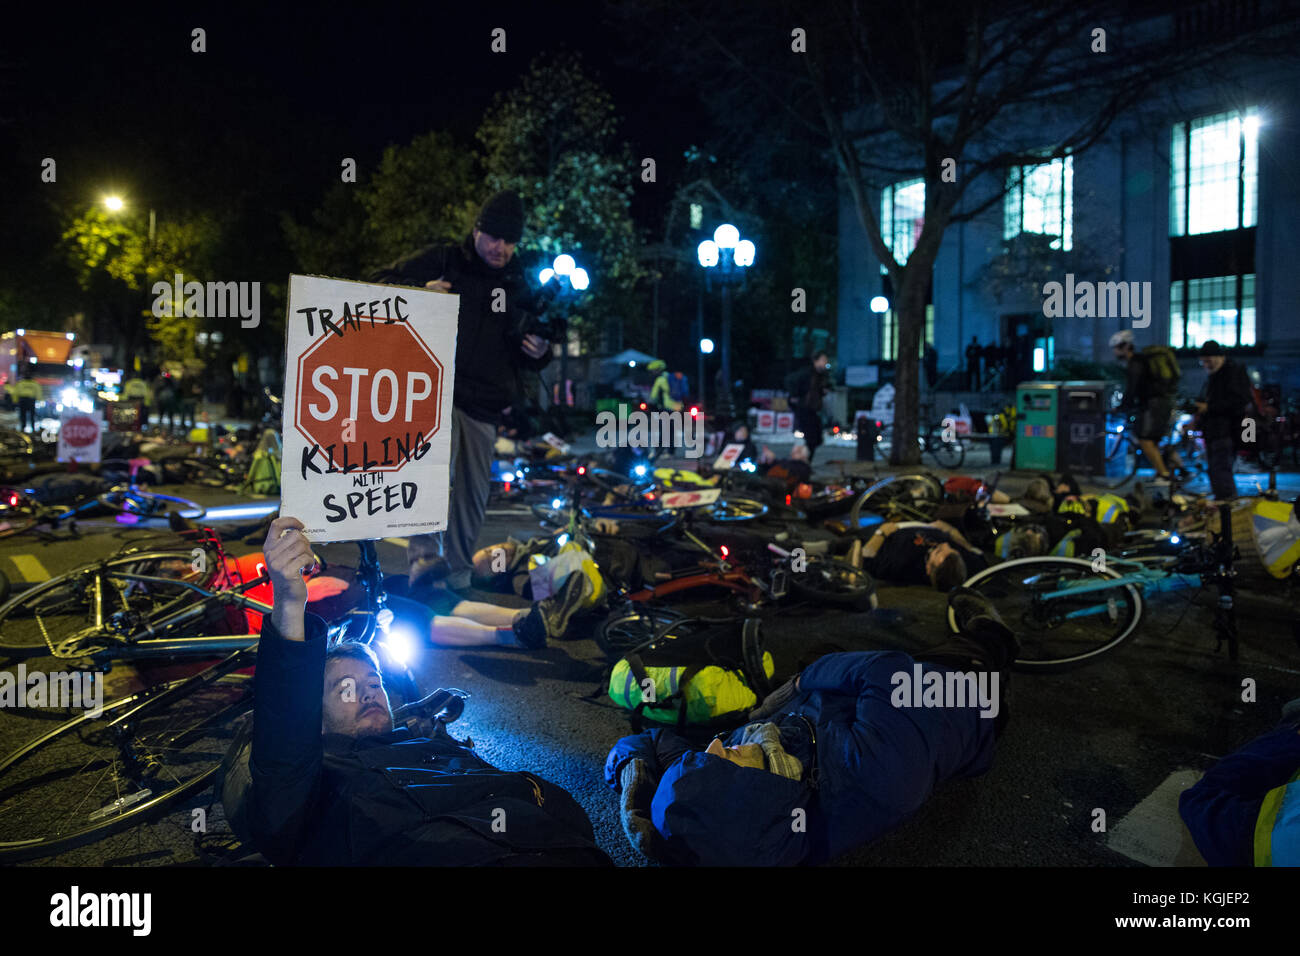 London, UK. 8th November, 2017. Campaigners from Stop Killing Cyclists stage a die-in during a vigil for Jerome Roussel outside Islington town hall. Jerome Roussel was  a 51-year-old cyclist who died in hospital on 25th June, seven weeks after a cycling accident on Pentonville Road. An inquest into his death was due to be held today. Credit: Mark Kerrison/Alamy Live News Stock Photo